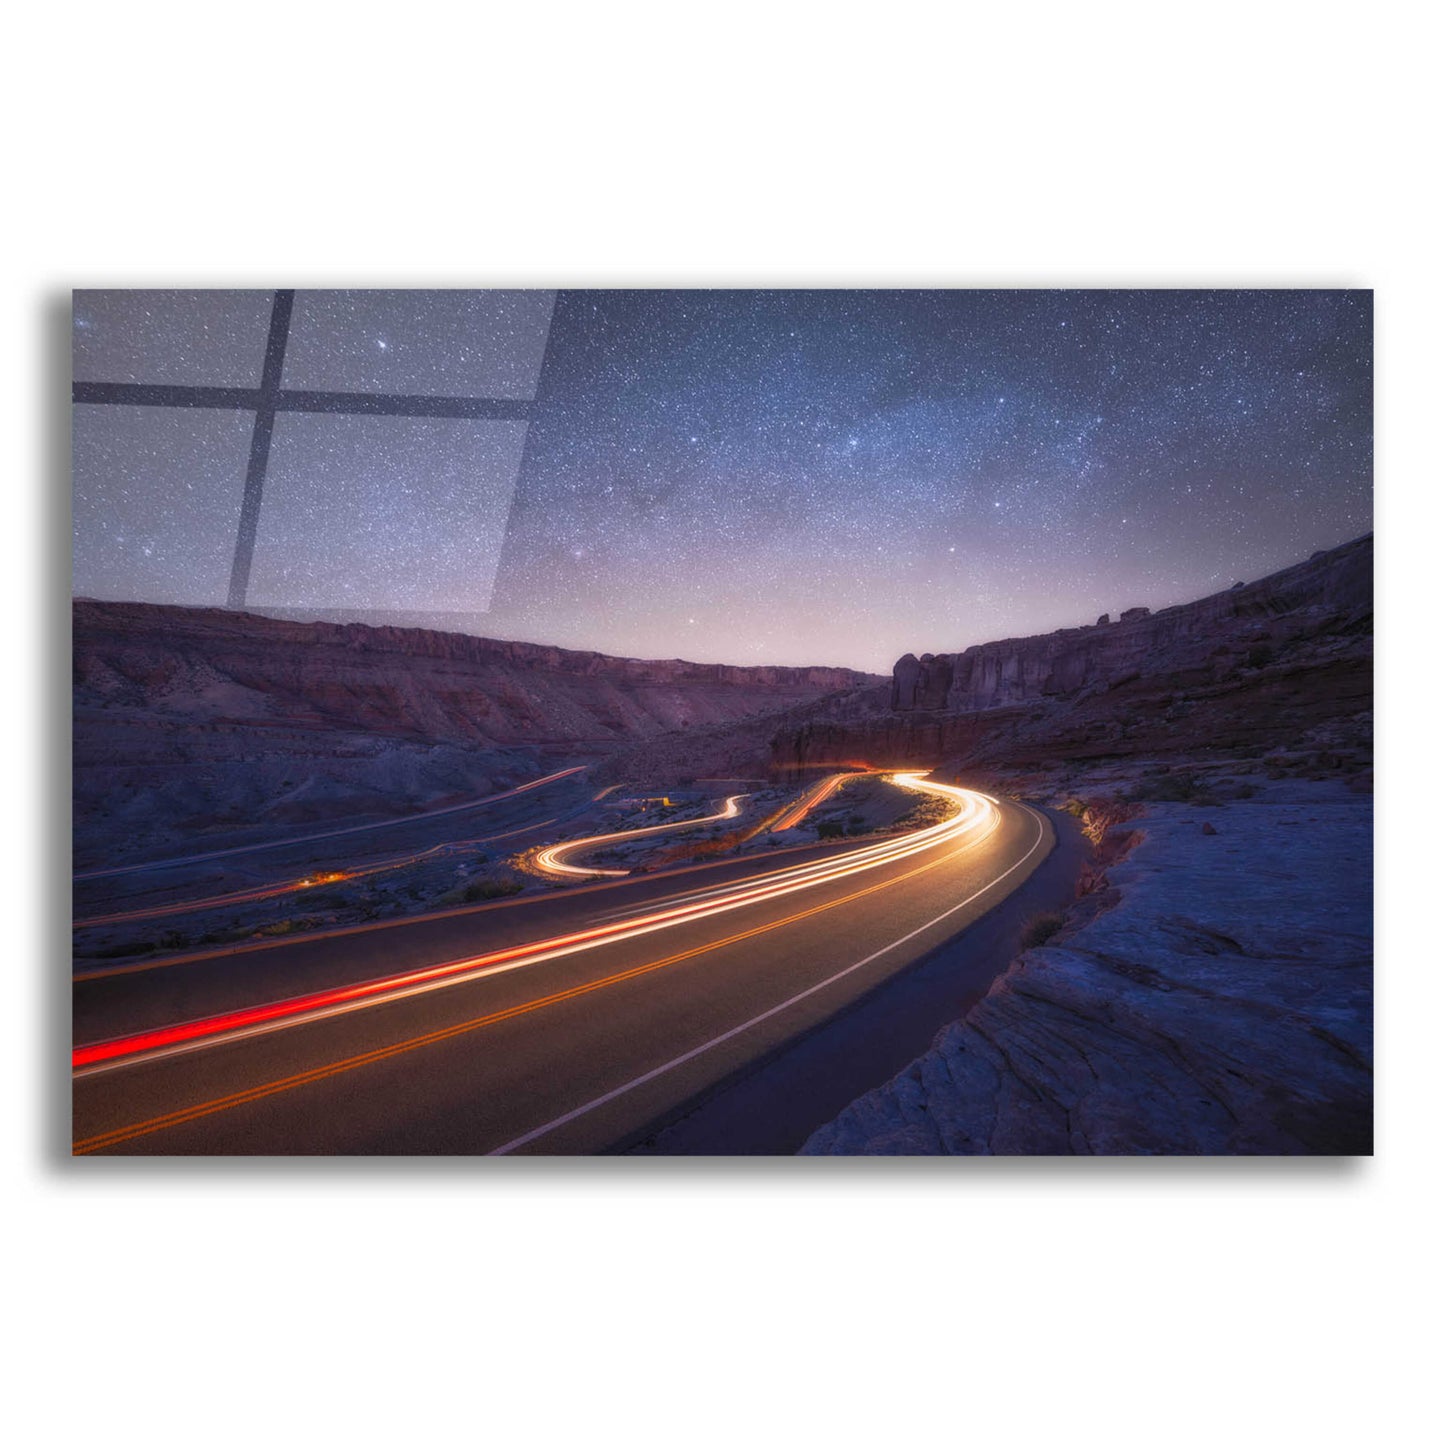 Epic Art 'Starlight Drive - Arches National Park' by Darren White, Acrylic Glass Wall Art,16x12